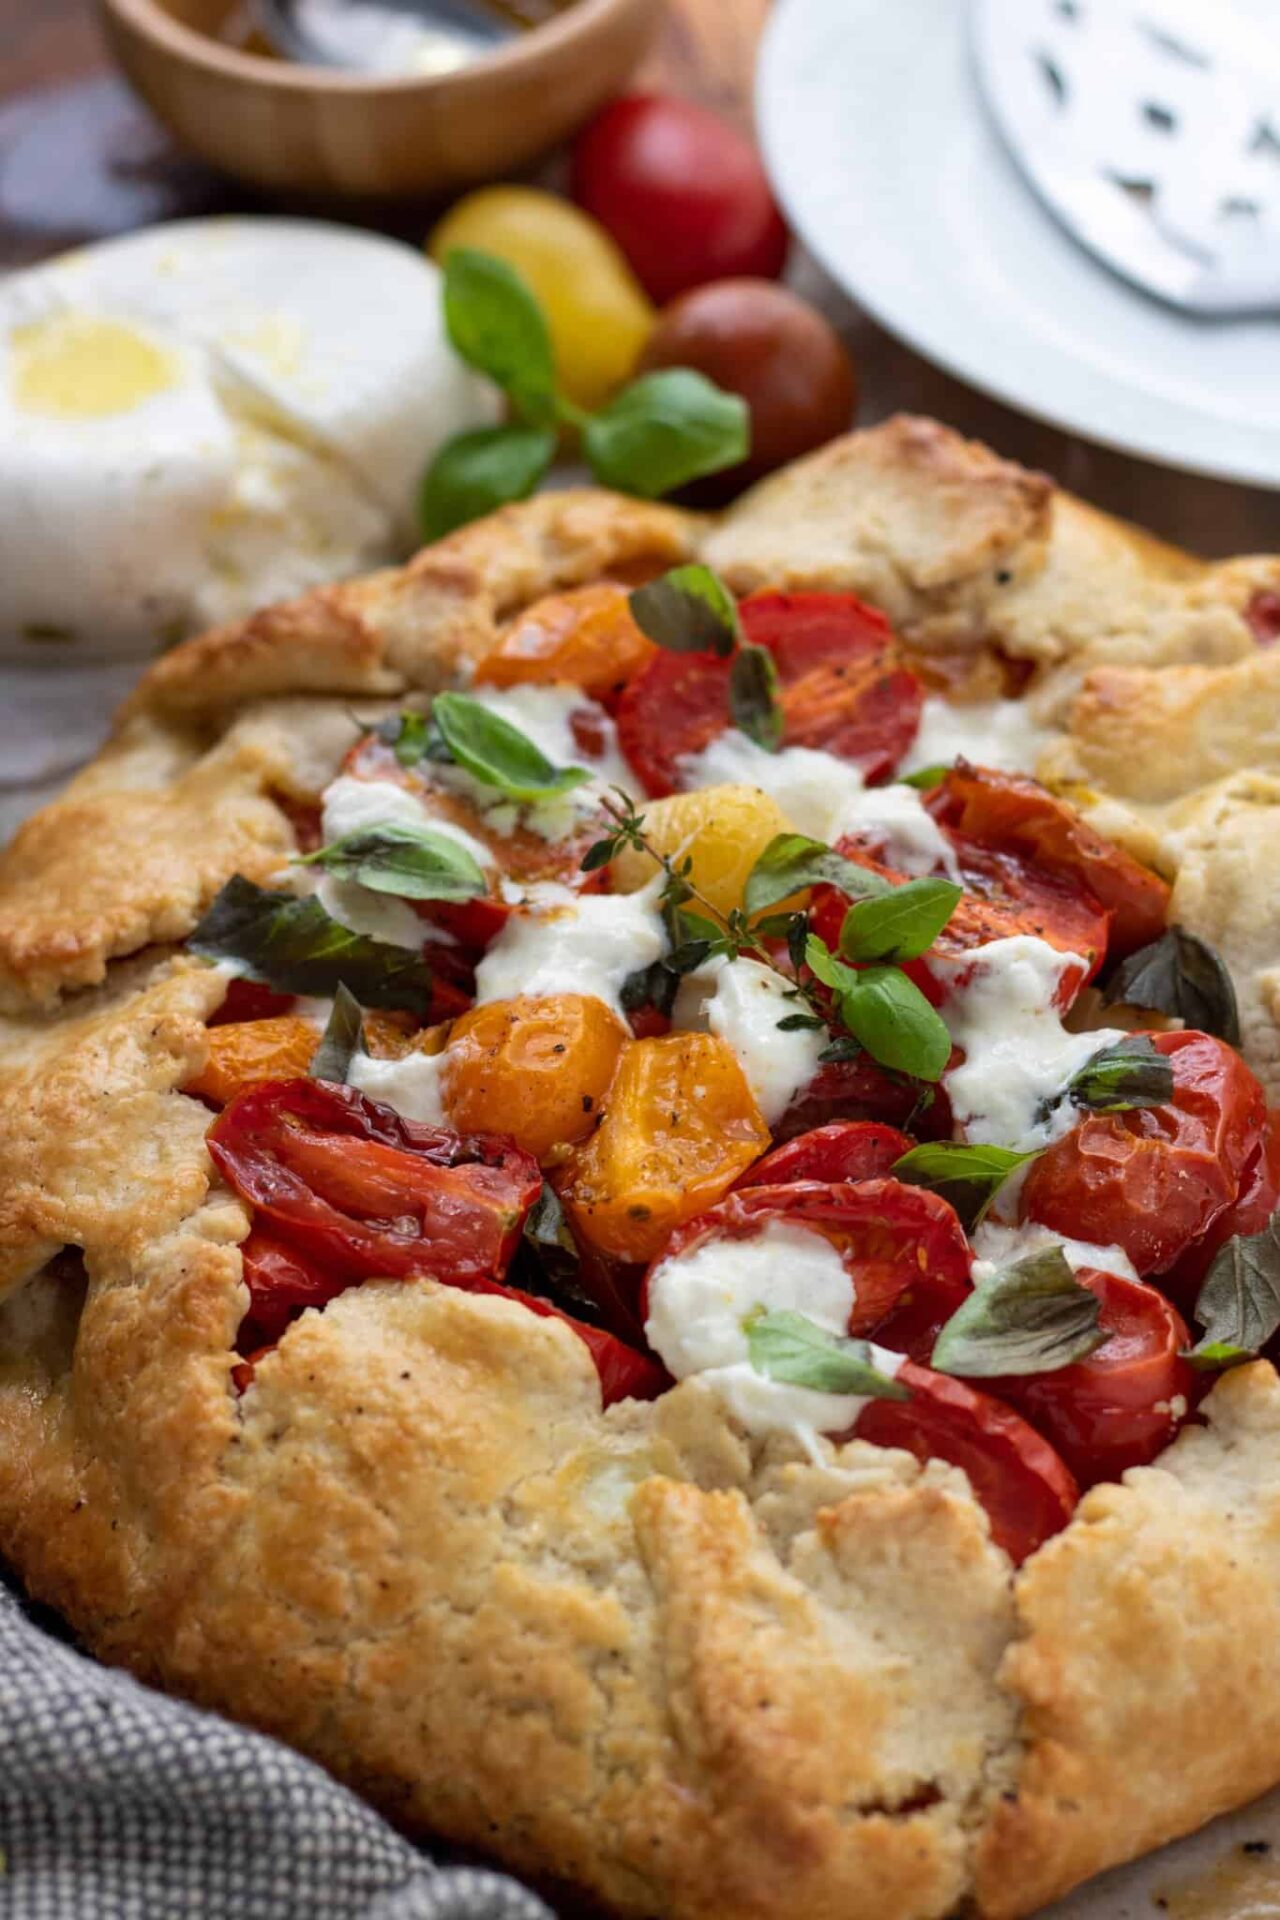 A savory tomato crostata topped with melted burrata cheese, fresh basil and a sprig of thyme. You can see a small white dish with a pie server in the background. You can also see a ball of fresh burrata cheese that's drizzled with olive oil